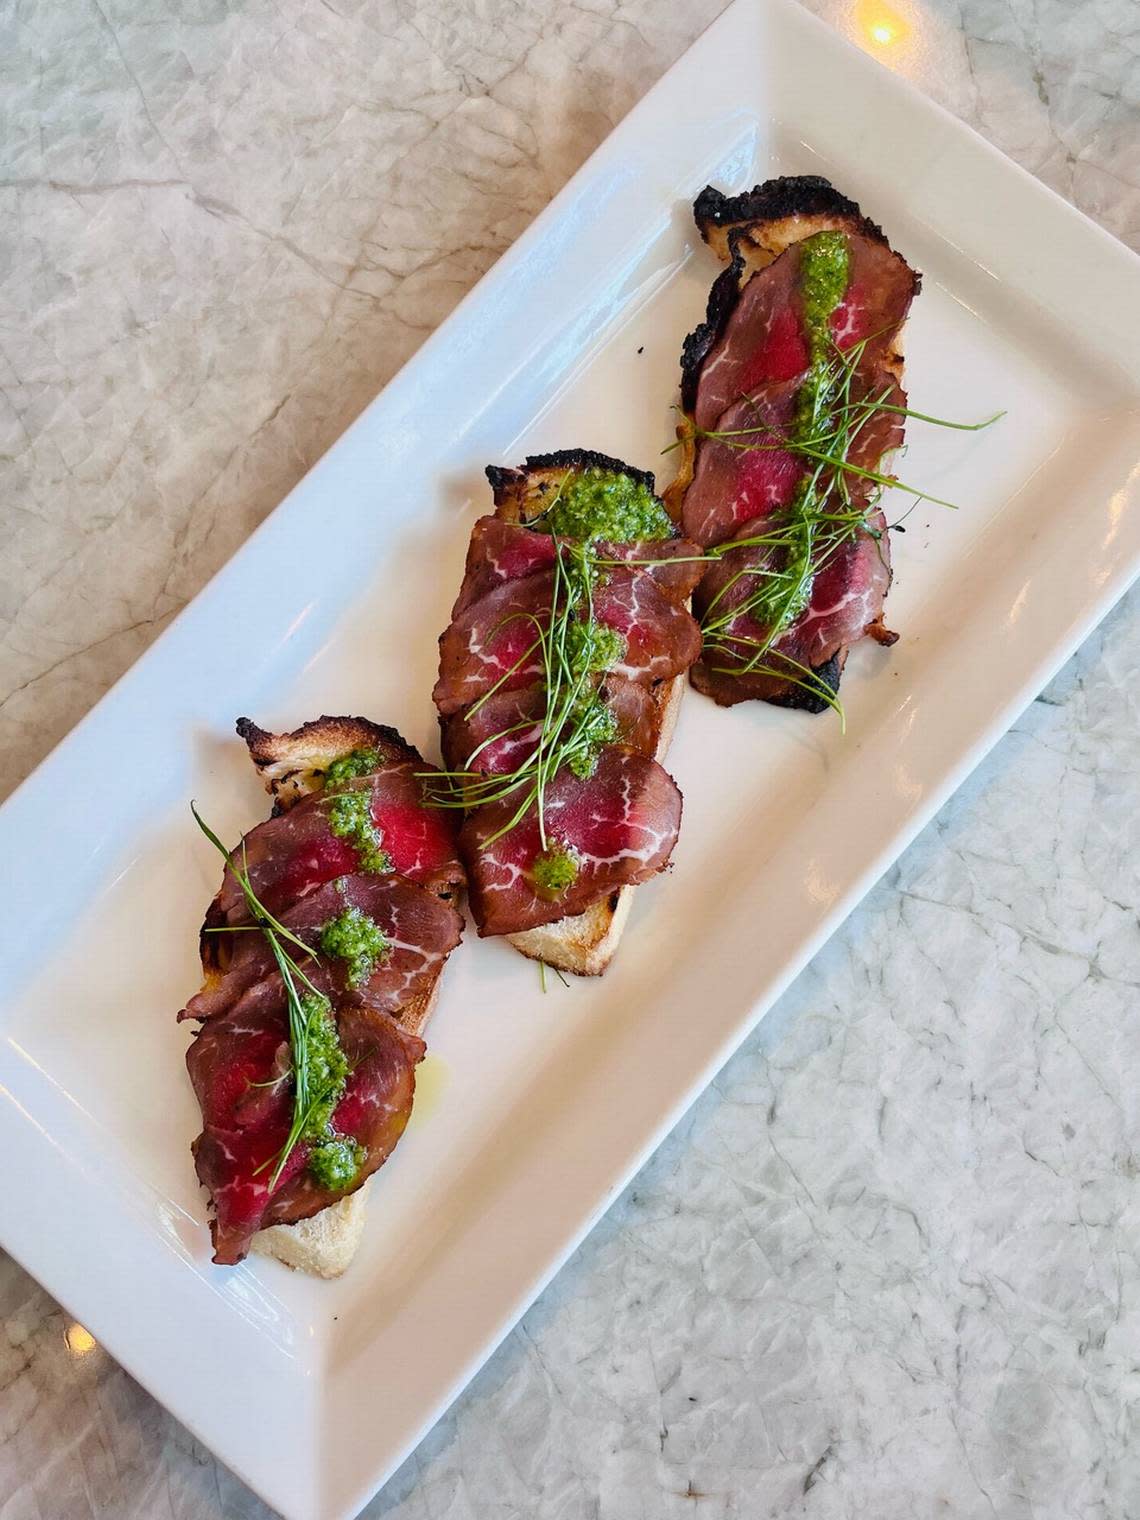 Panacea’s smoked carpaccio appetizer with black garlic, sliced baguette and herb pistou.